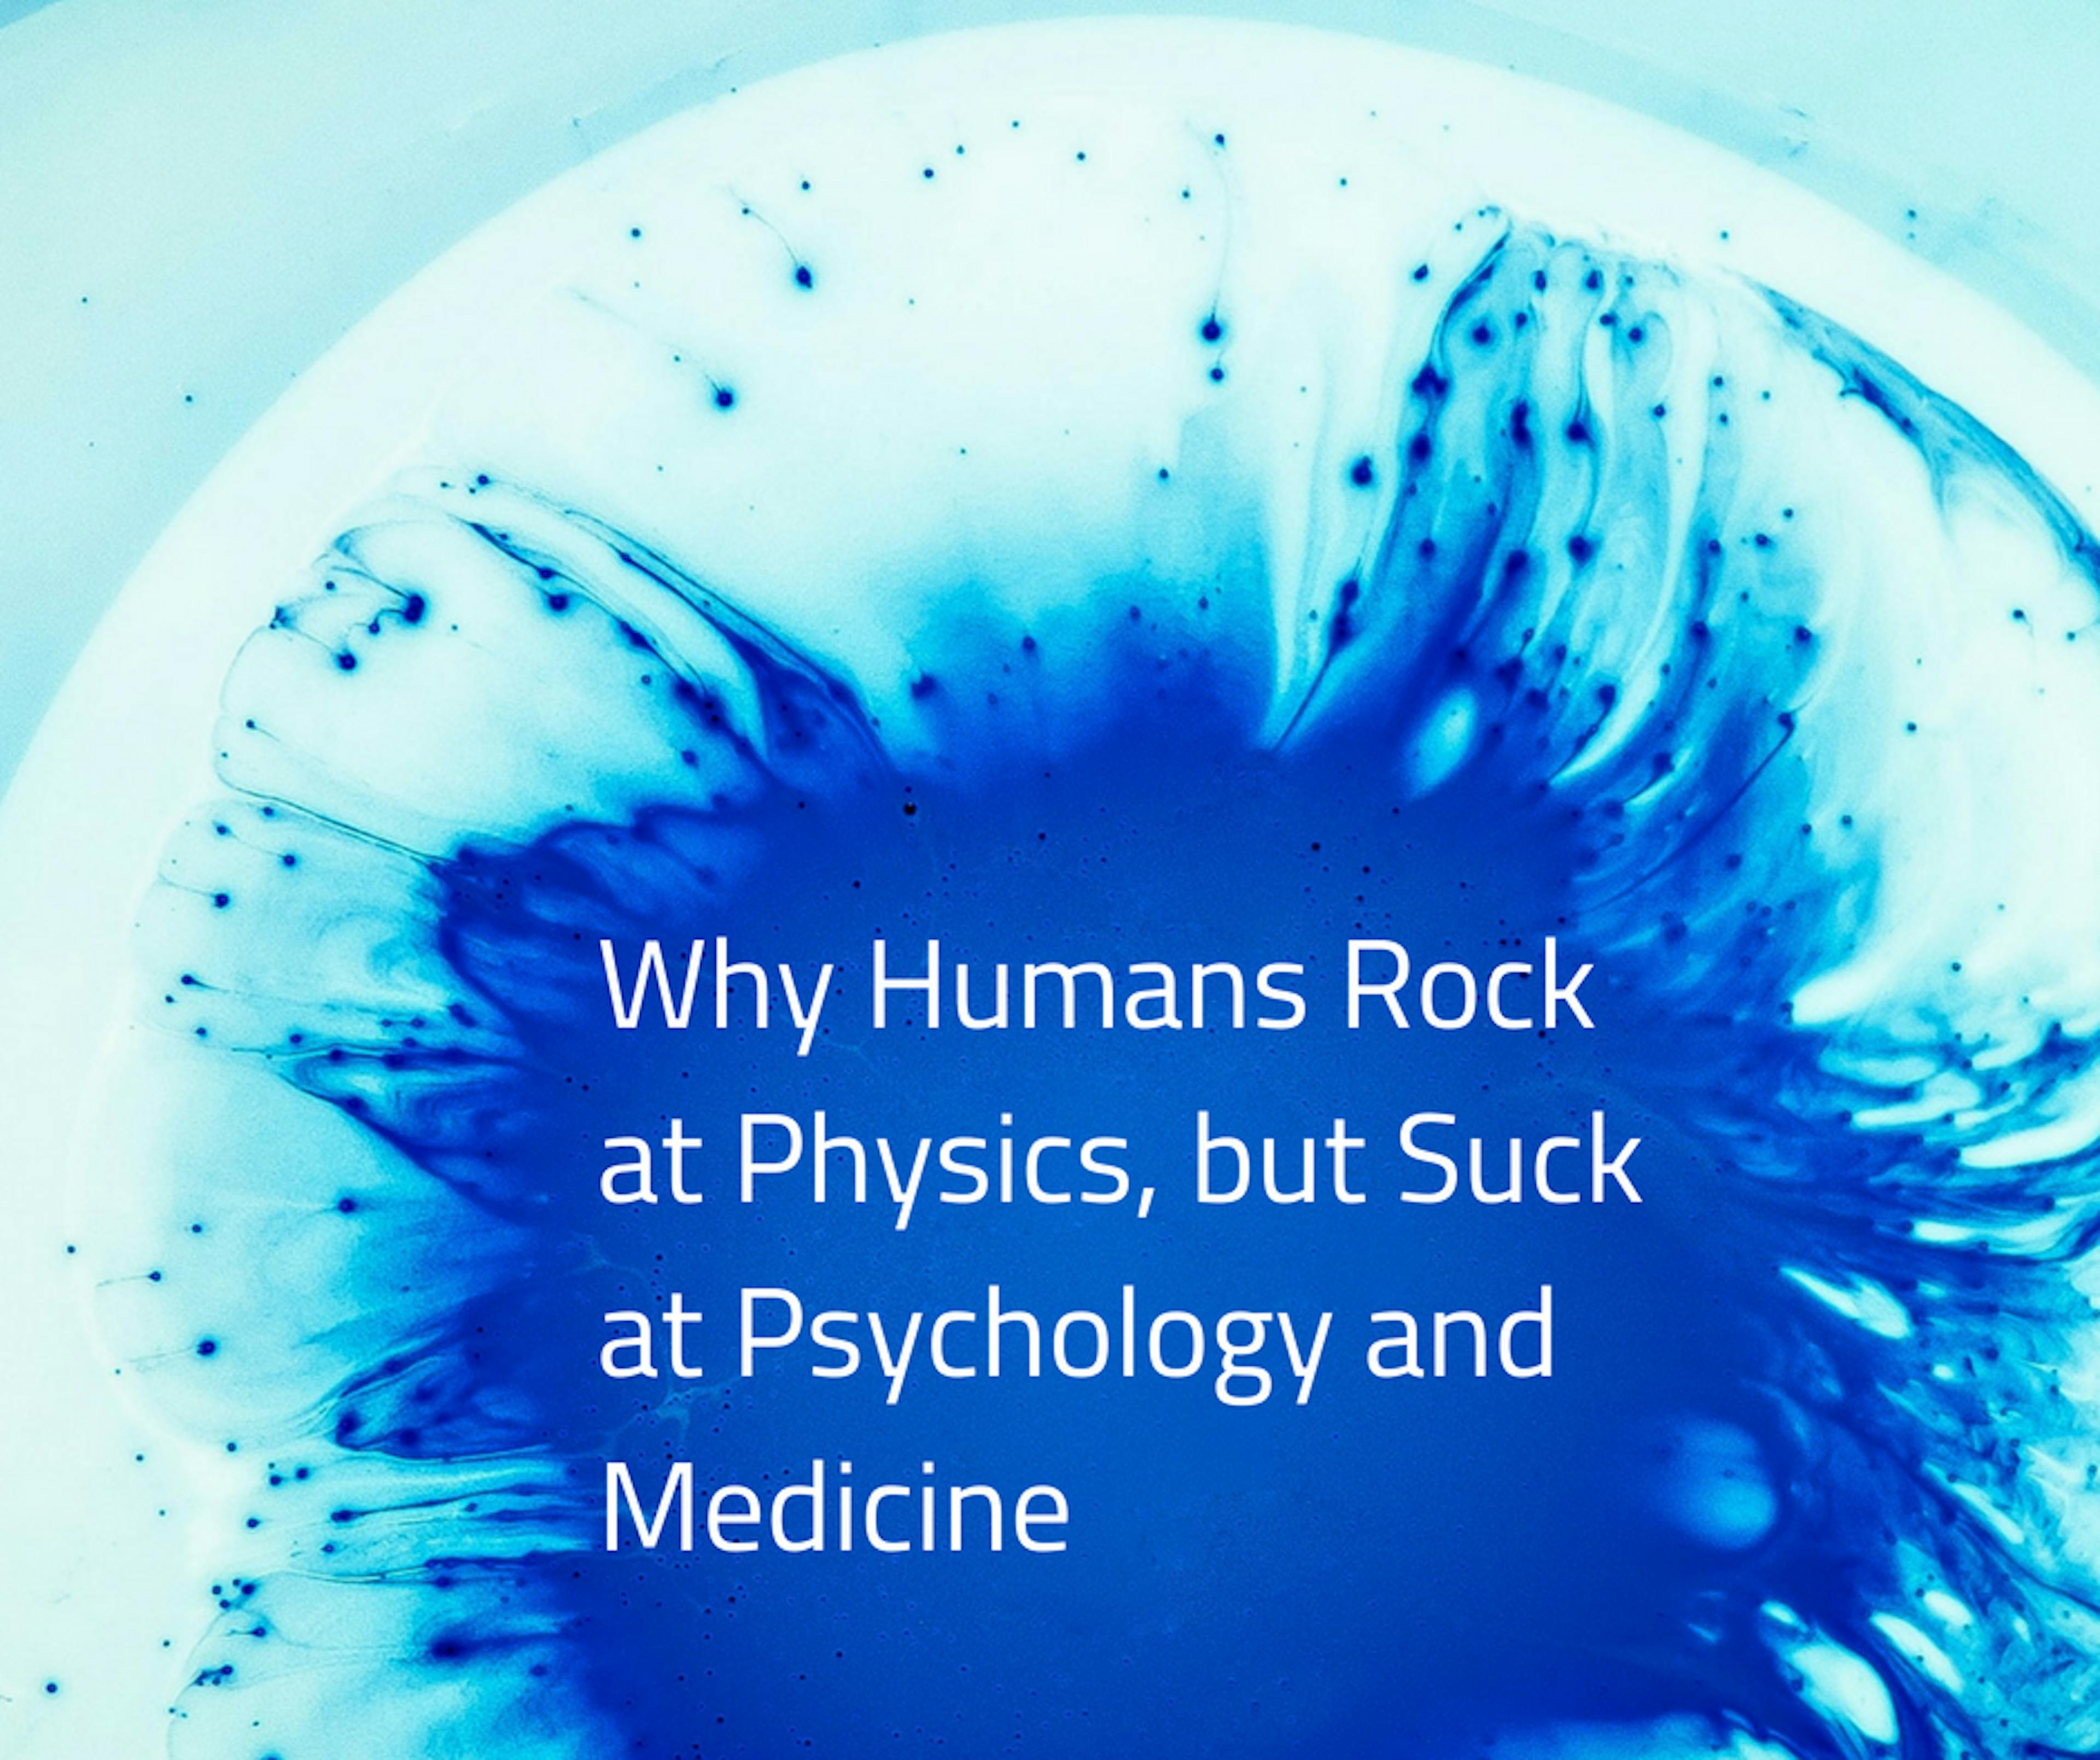 /why-humans-rock-at-physics-but-suck-at-psychology-and-medicine-3b9bd6dc6bca feature image